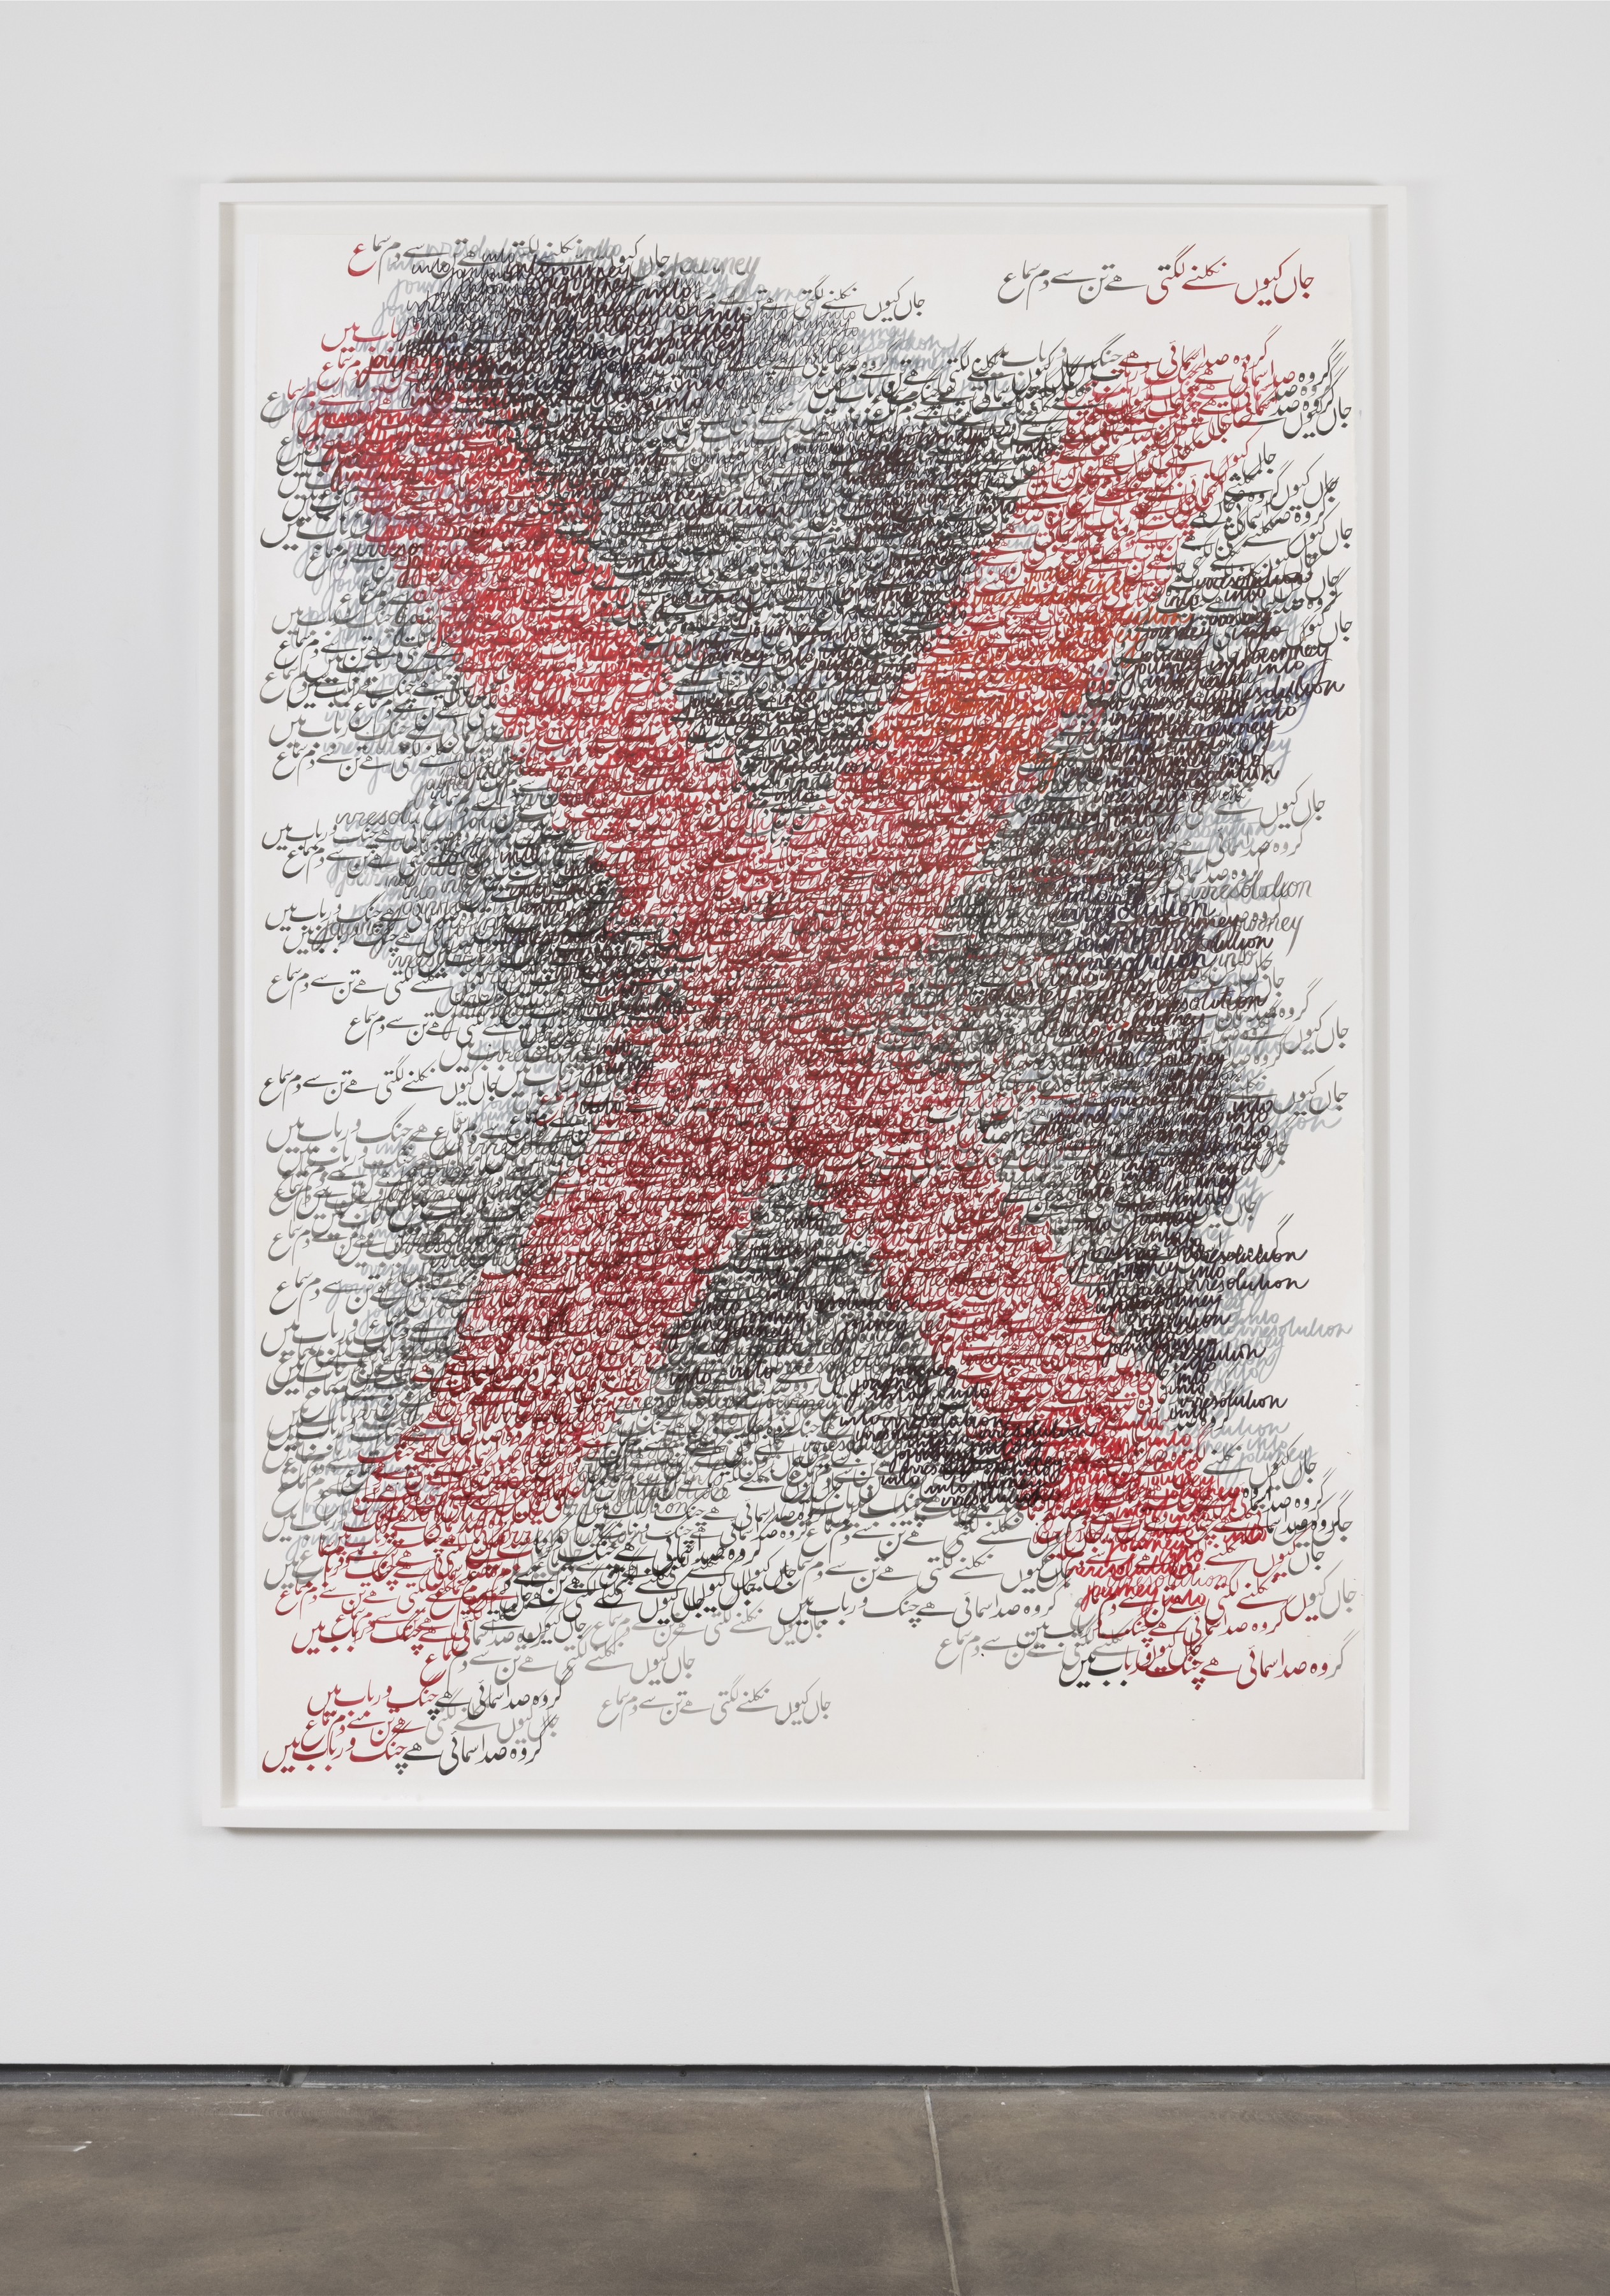 X, 2019-2020
ink and gouache on paper
paper: 90 x 60 inches (228.6 x 152.4 cm)